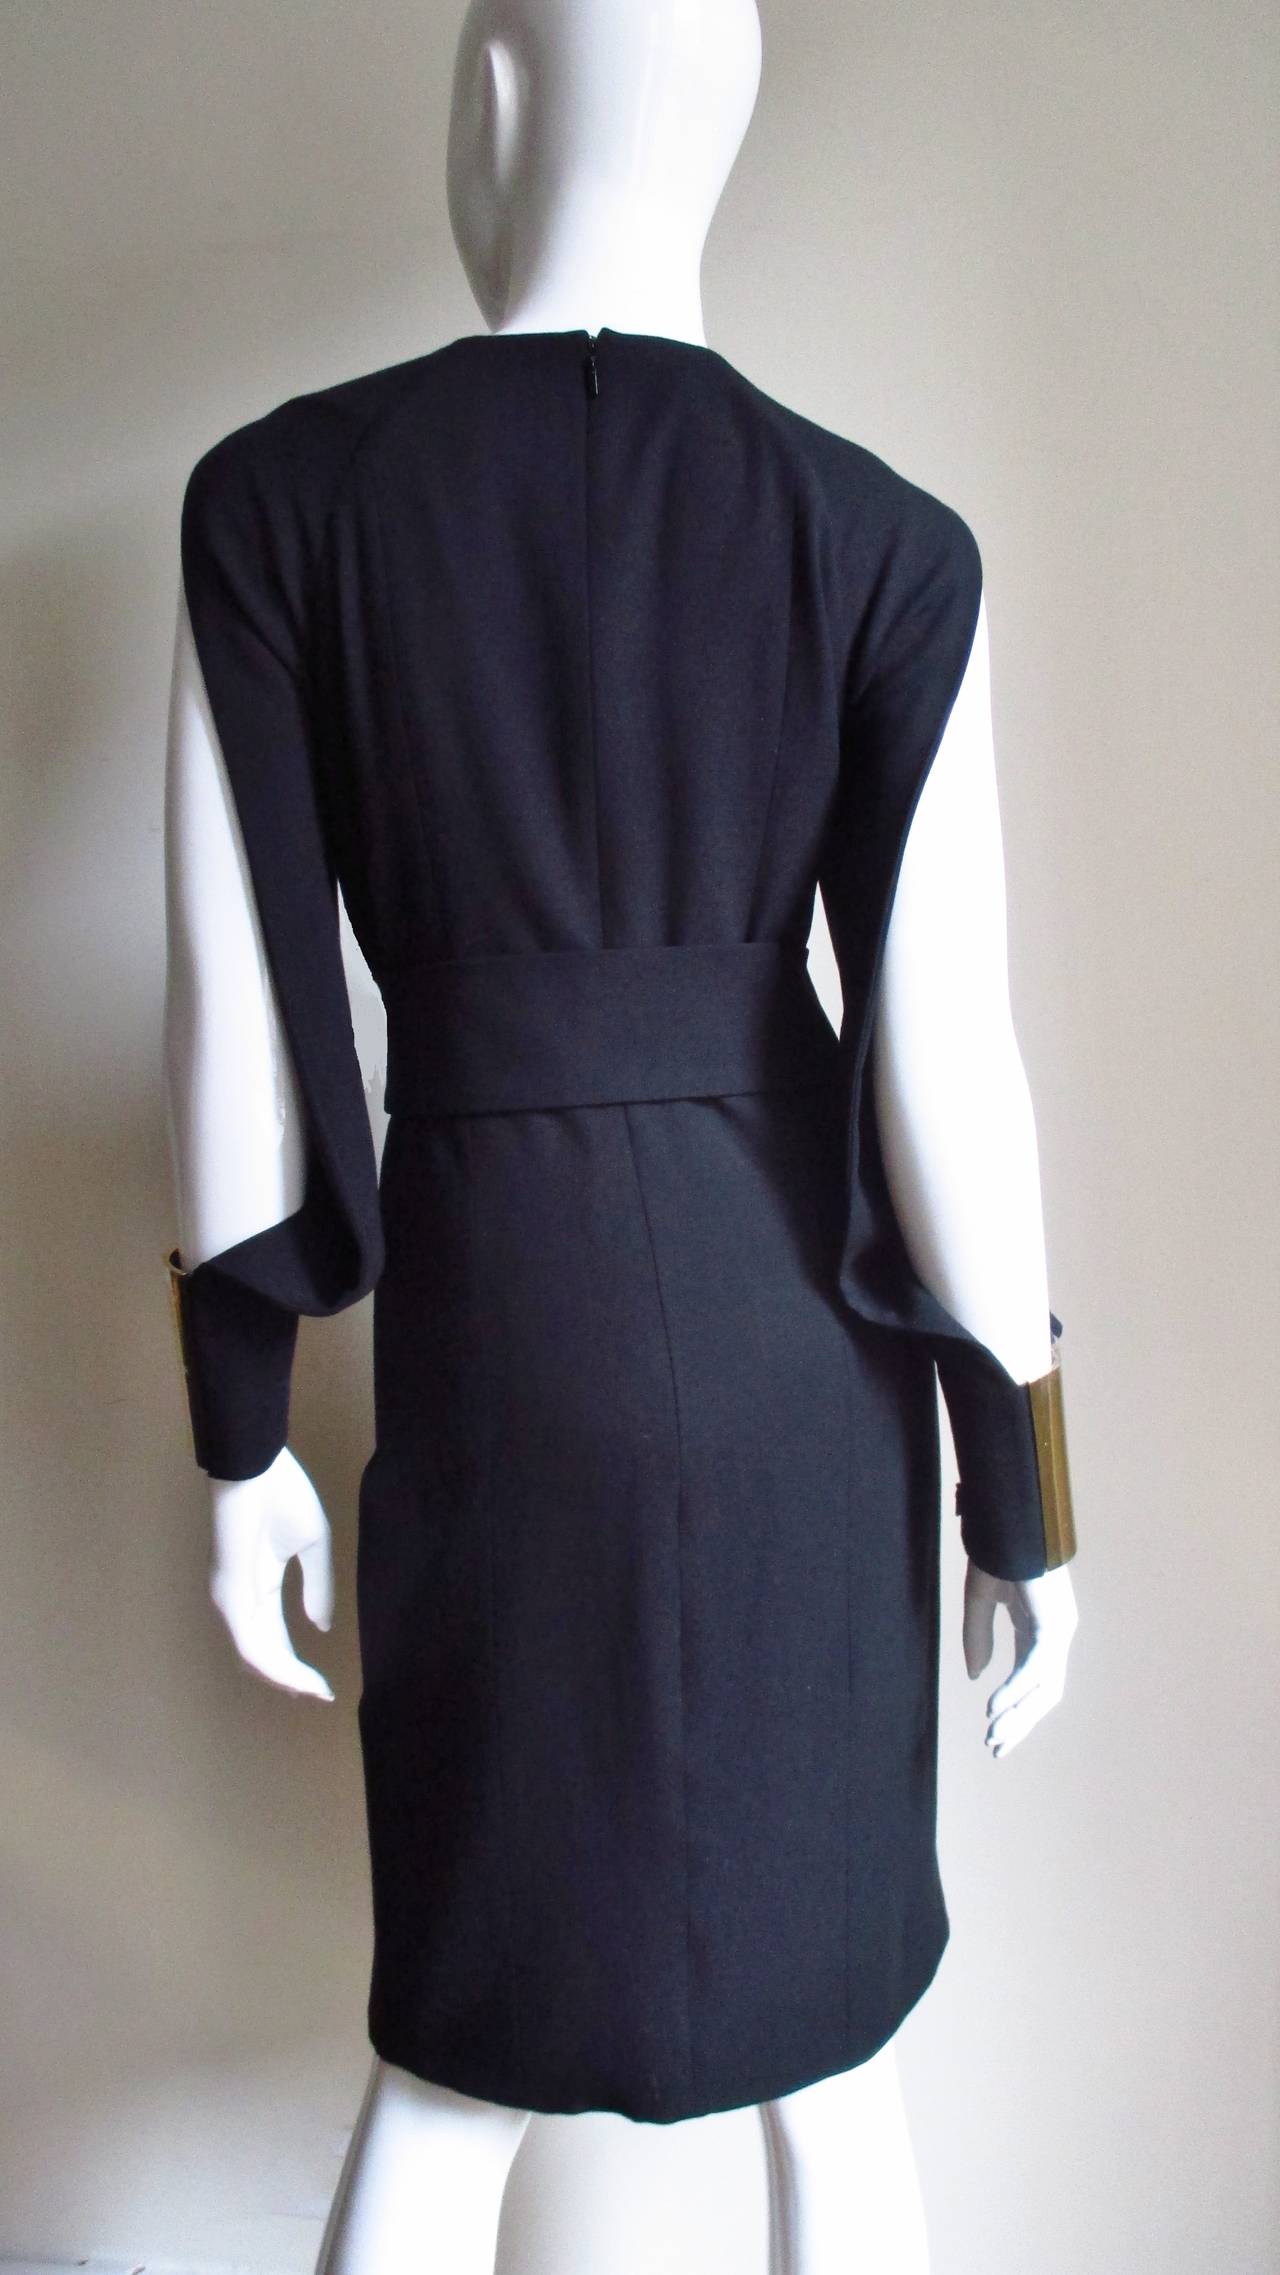 Gucci Split Sleeves Dress With Gold Bracelet Cuffs For Sale at 1stdibs